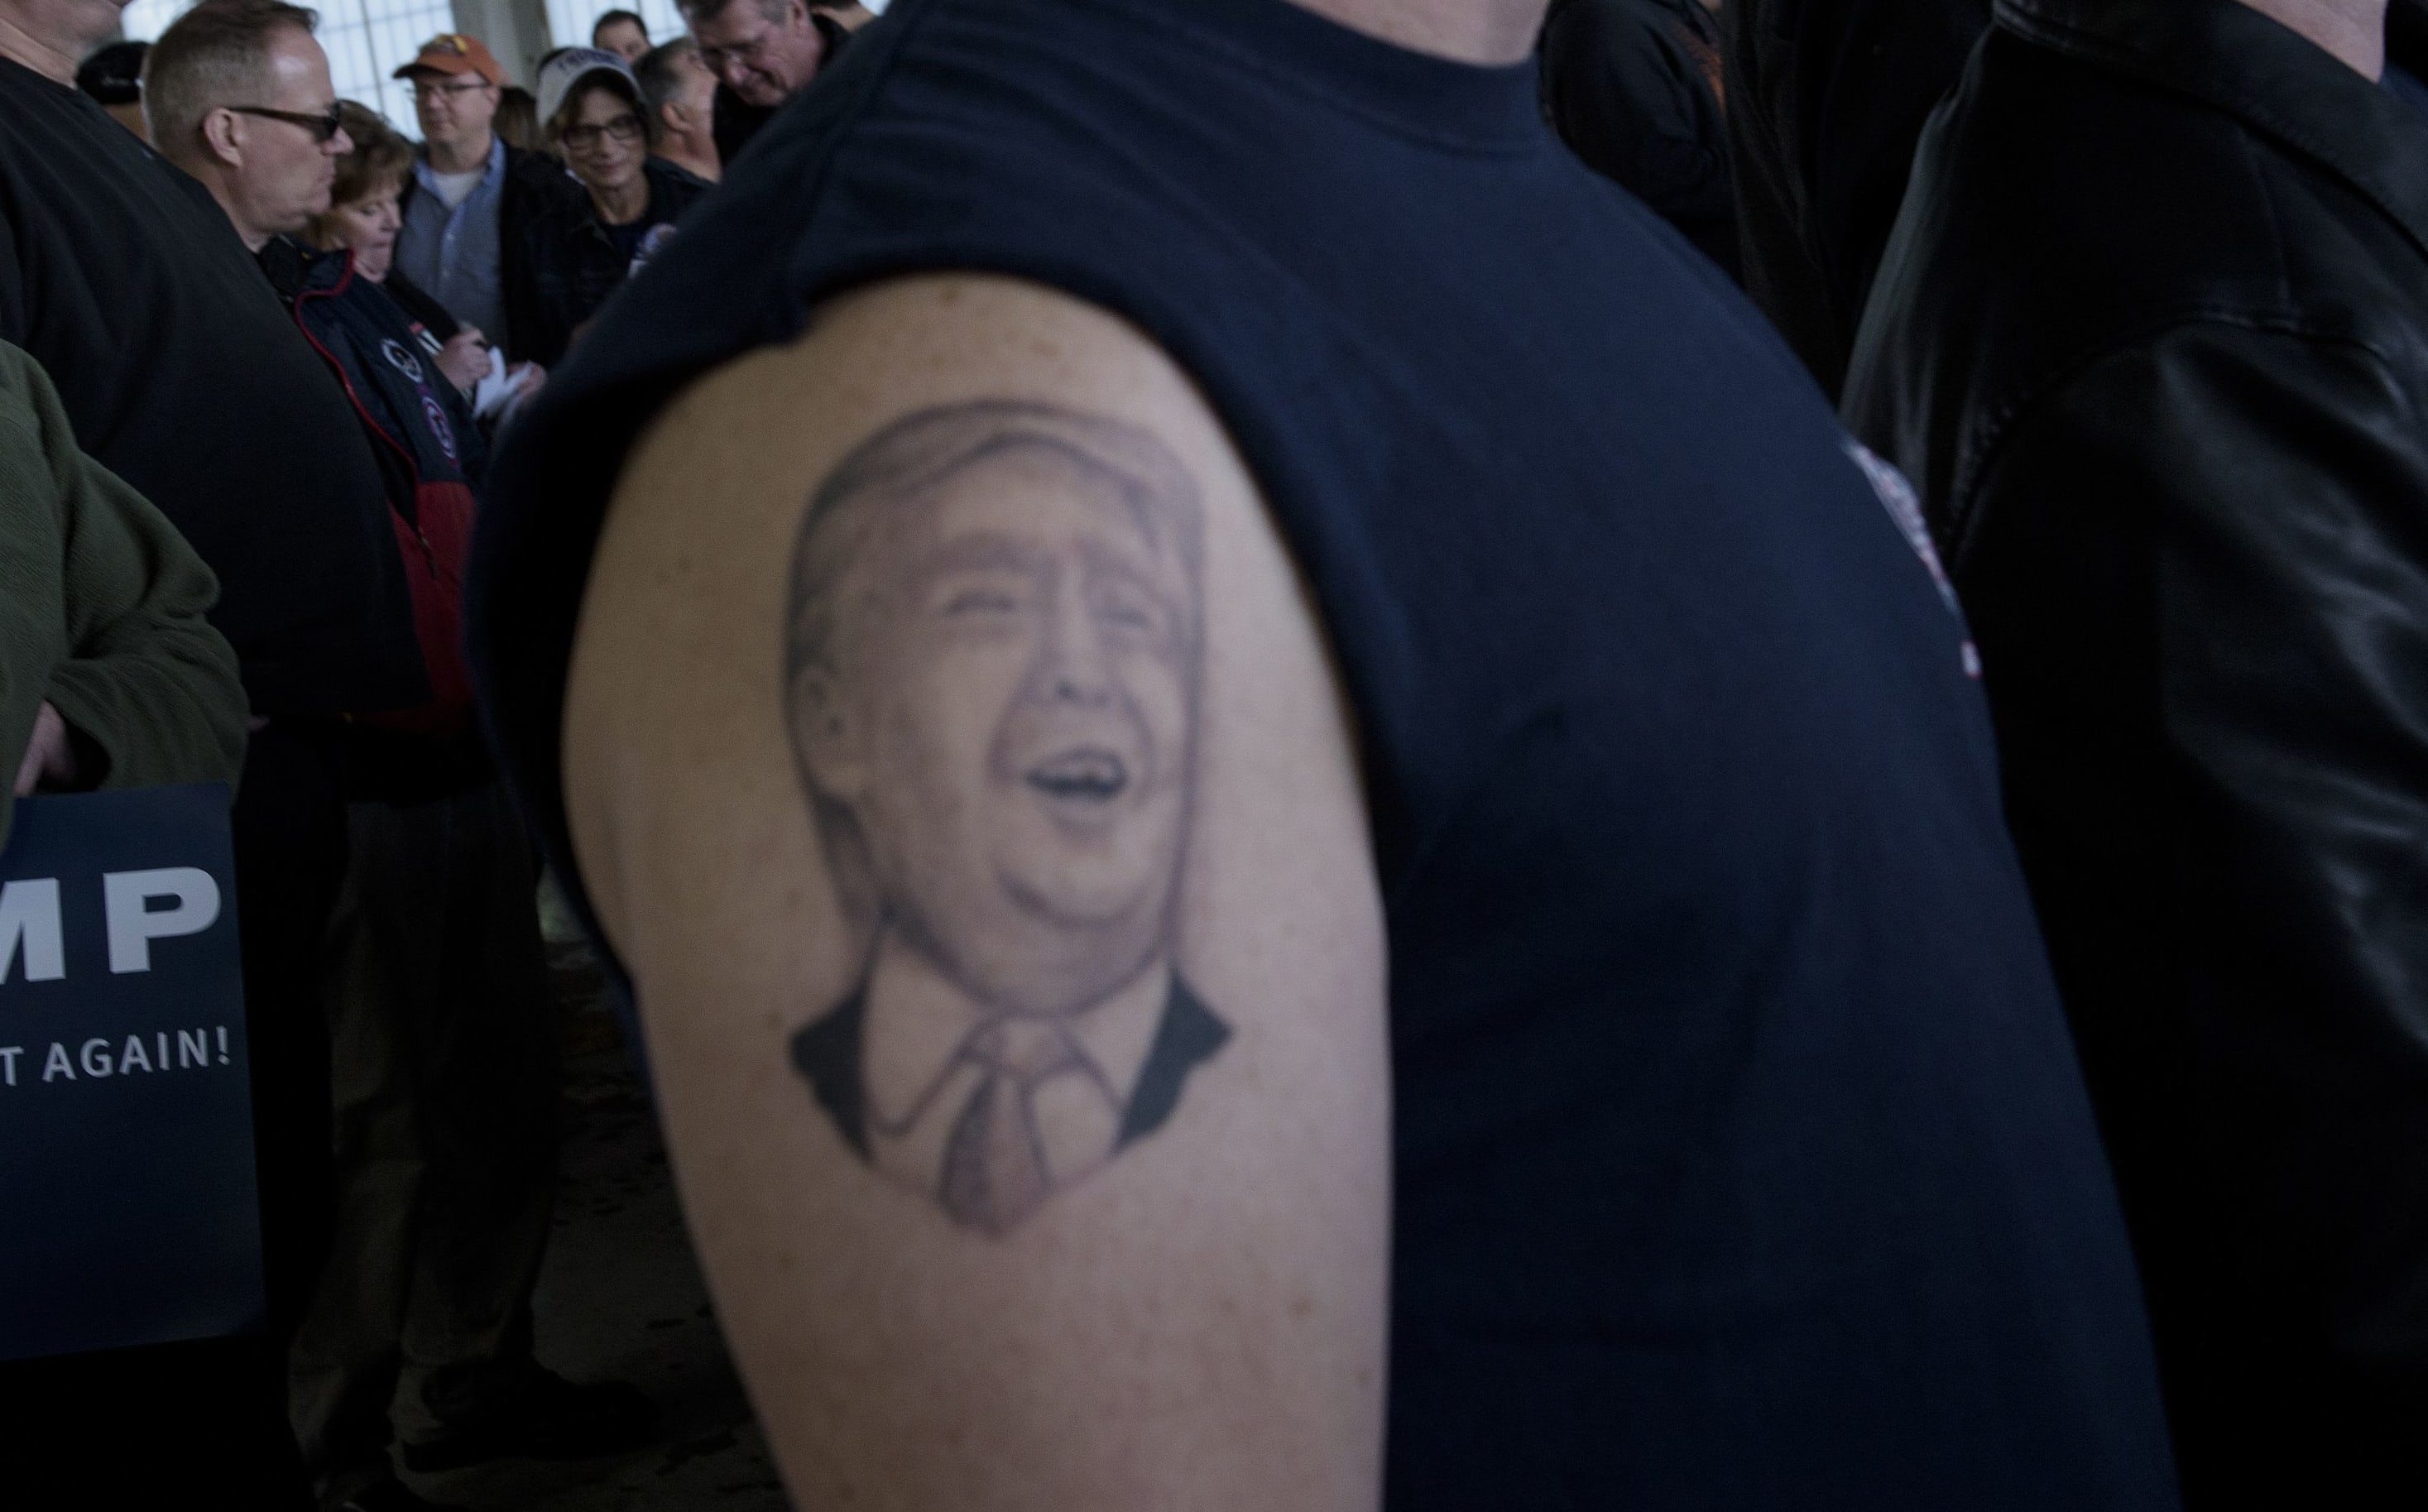 A tattoo of US Republican presidential hopeful Donald Trump on a supporter's arm.